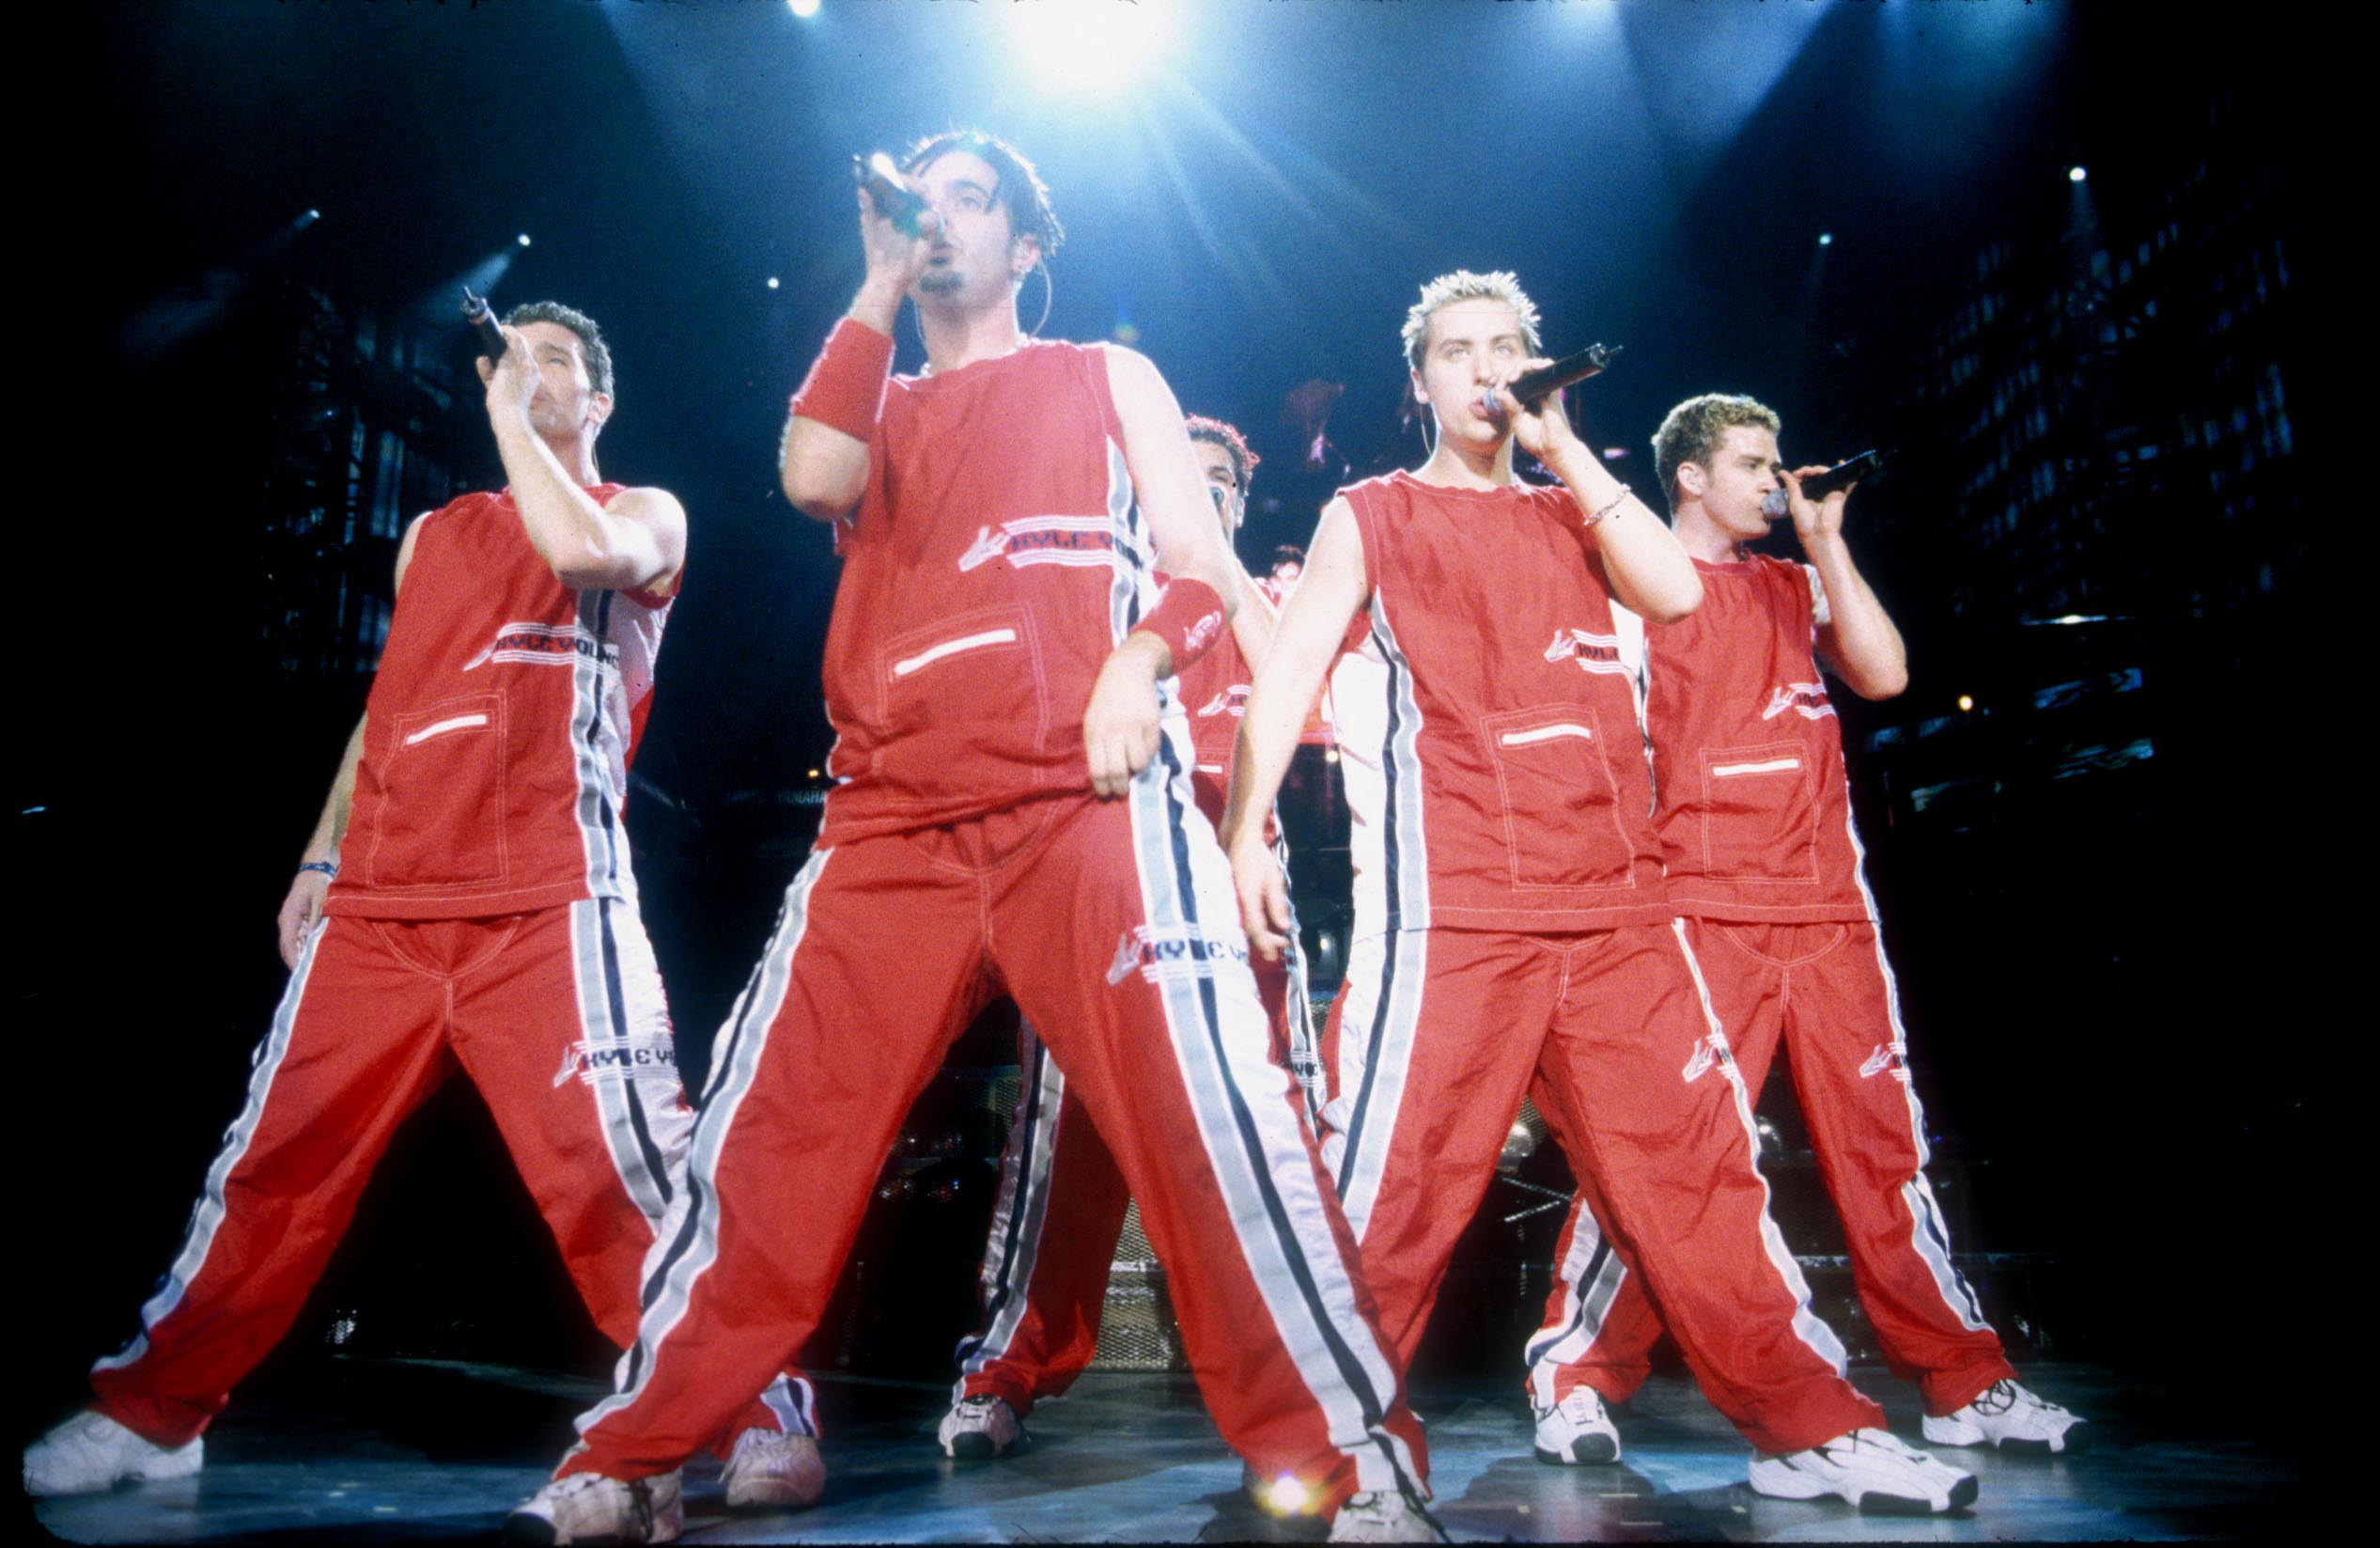 JC Chasez, Chris Kirkpatrick, Lance Bass, Justin Timberlake, and Joey Fatone, also known as *NSYNC, performing